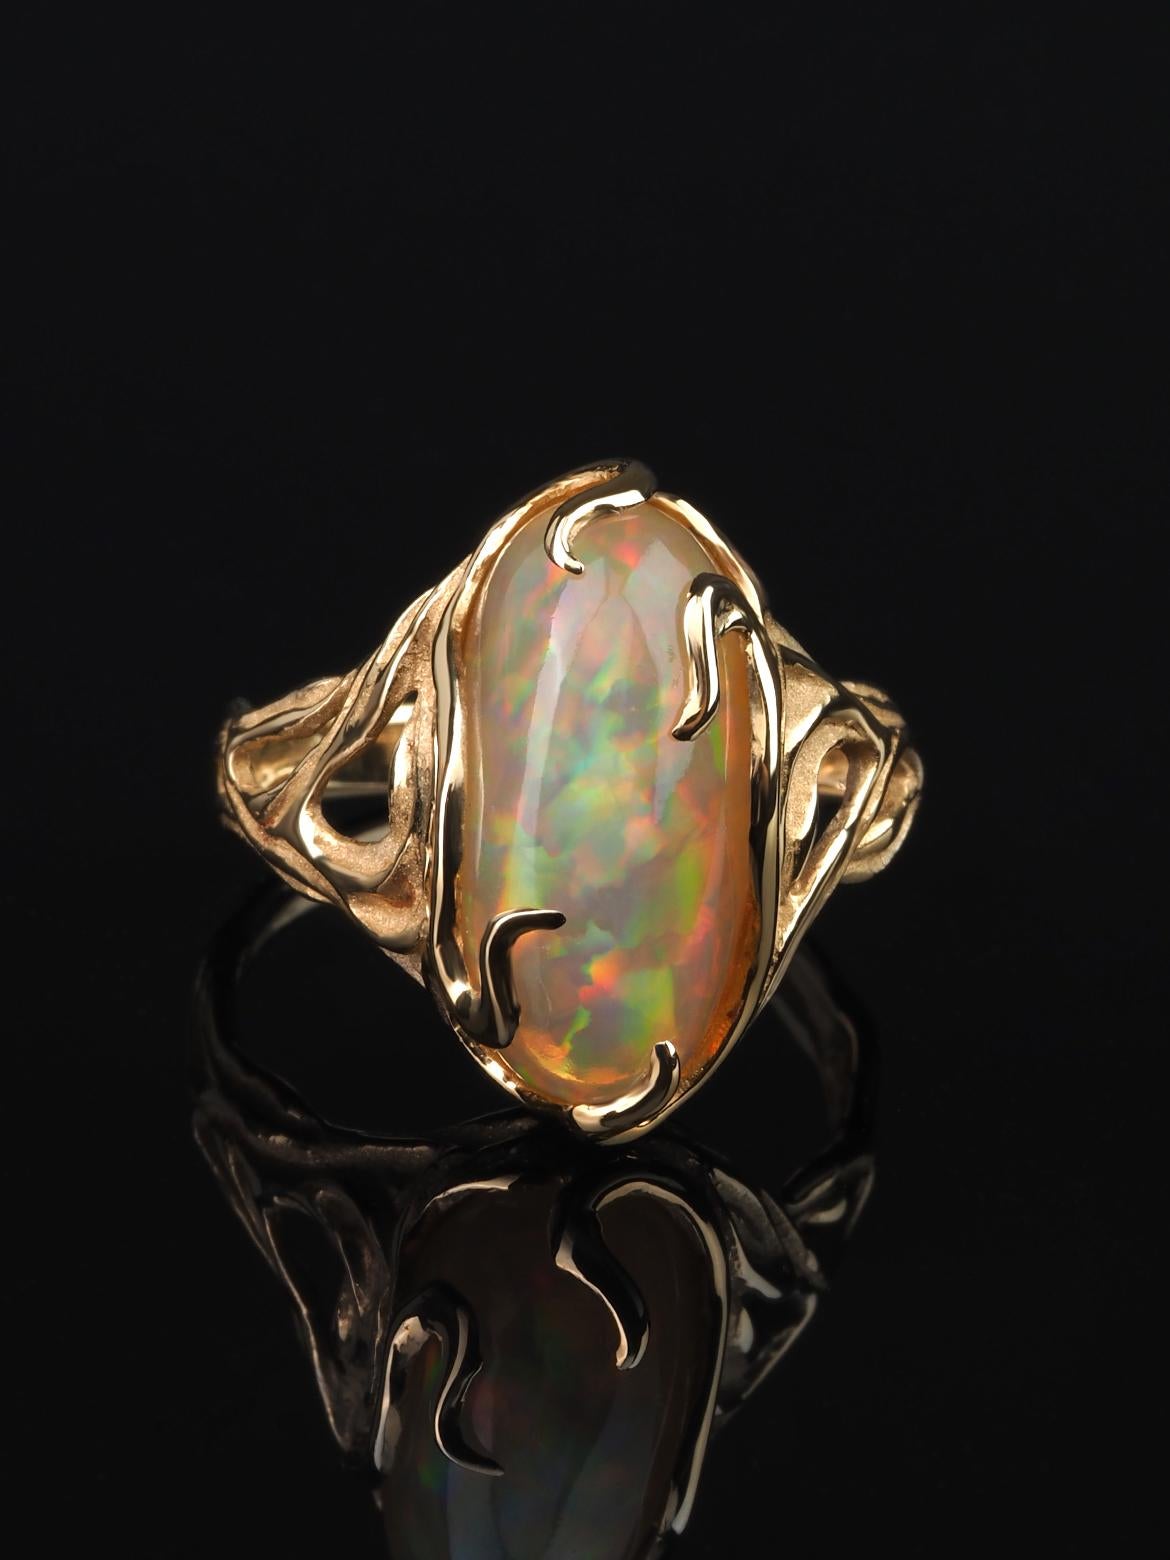 14K yellow gold ring with natural Opal  
opal origin - Ethiopia 
opal measurements - 0.28 х 0.31 х 0.71 in / 7 х 8 х 18 mm
stone weight - 5.80 carats
ring weight - 5 grams
ring size - 7.25 US (this ring may be resized, please contact us for further